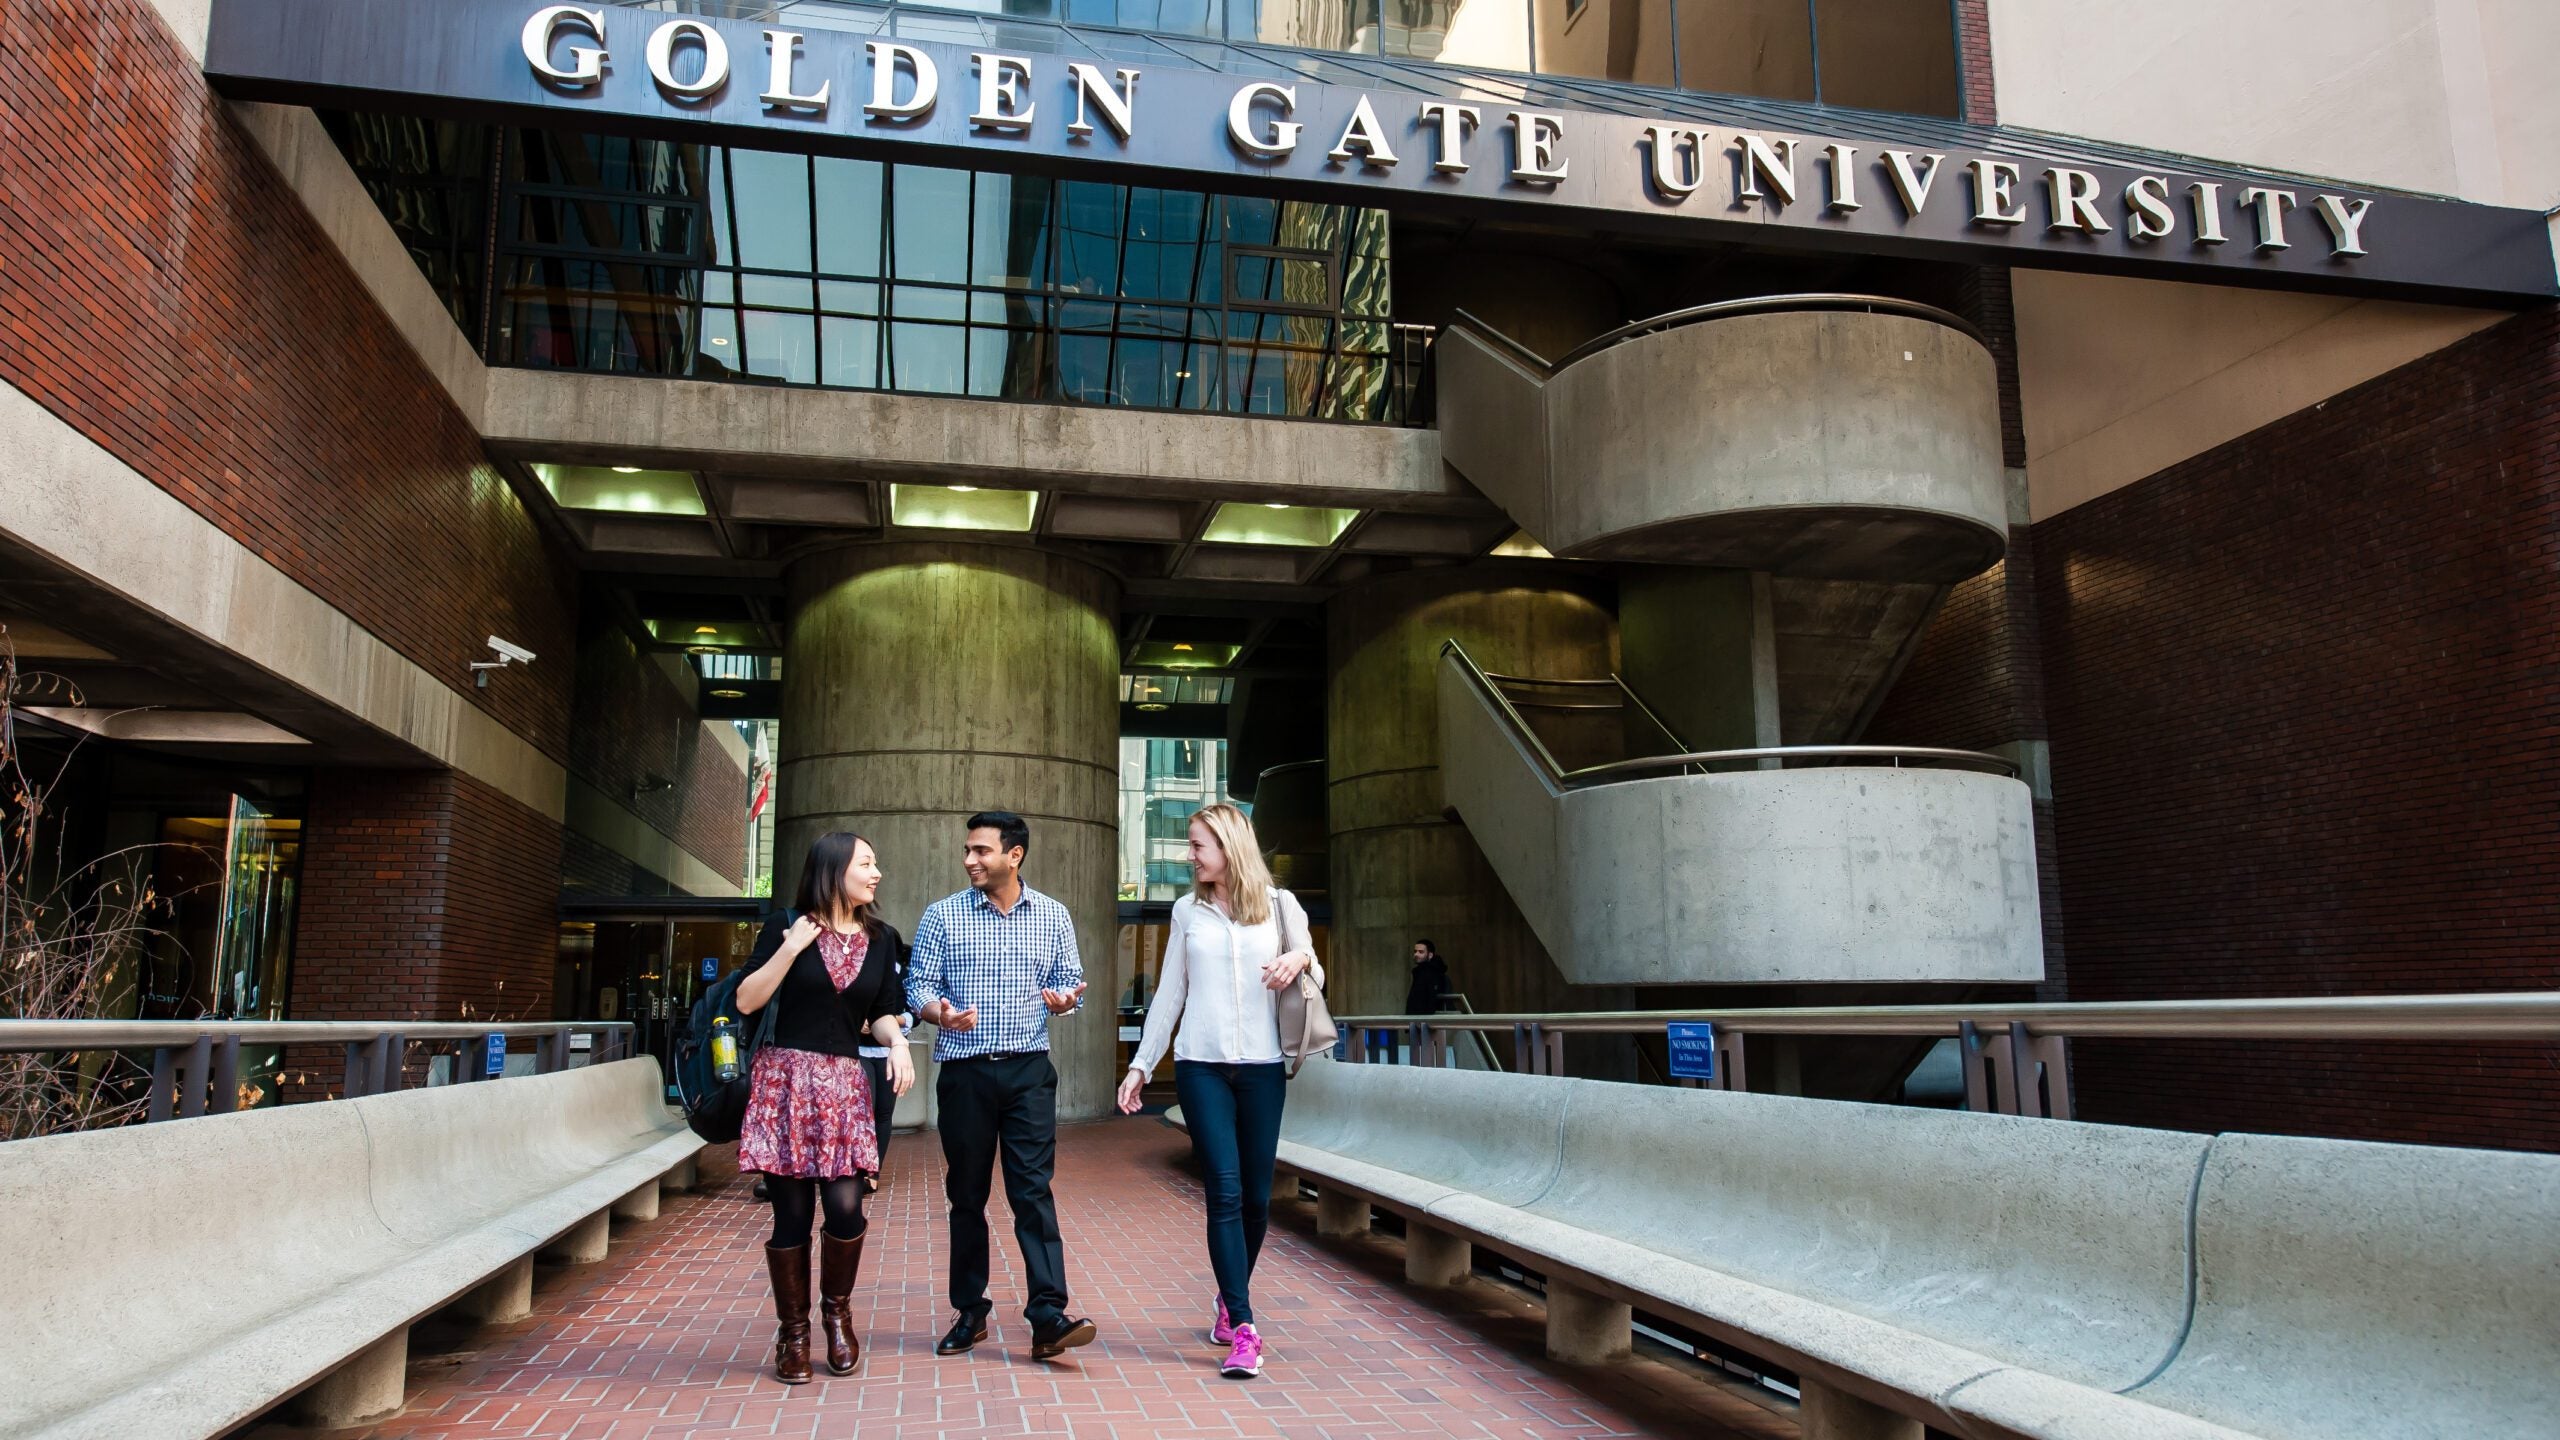 Students in front of Golden Gate University main entrance.